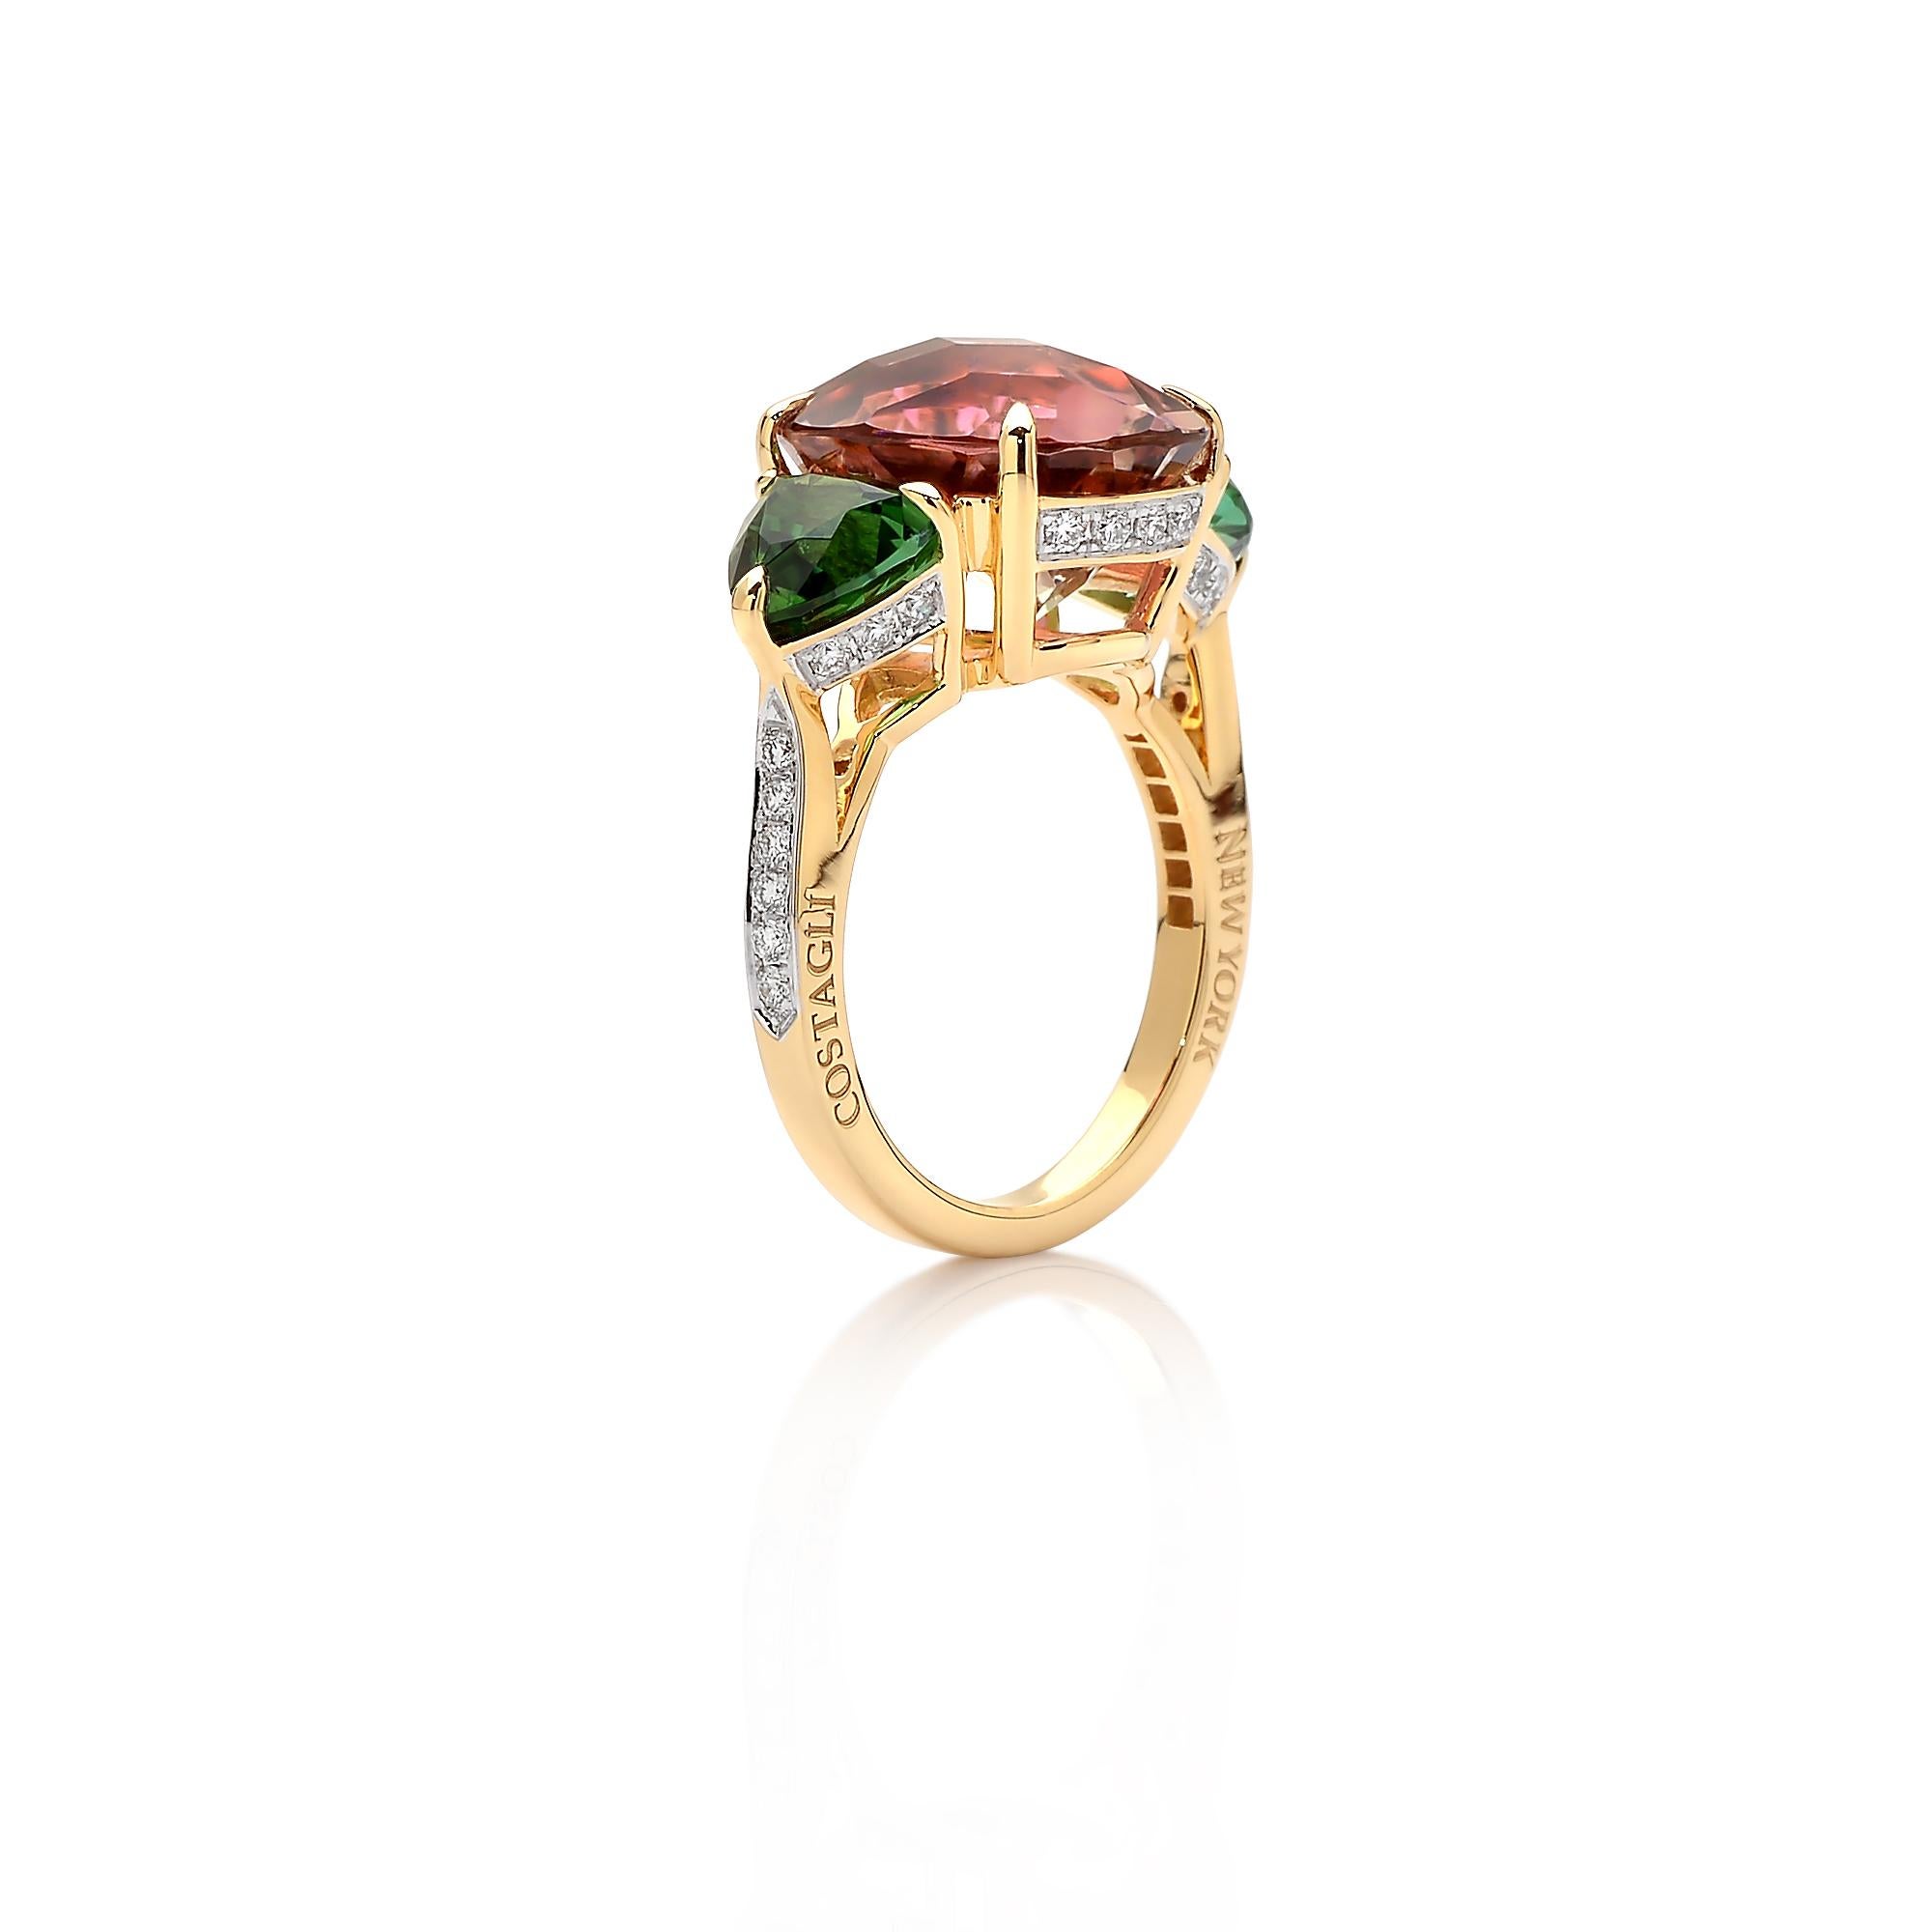 One-of-a-kind oval-cut watermelon tourmaline ring flanked by trillion-cut mint tourmaline side stones set in 18 karat yellow gold and pave-set round, brilliant diamond detailing. 

The beauty is in the details- from the combination of hues, the cut